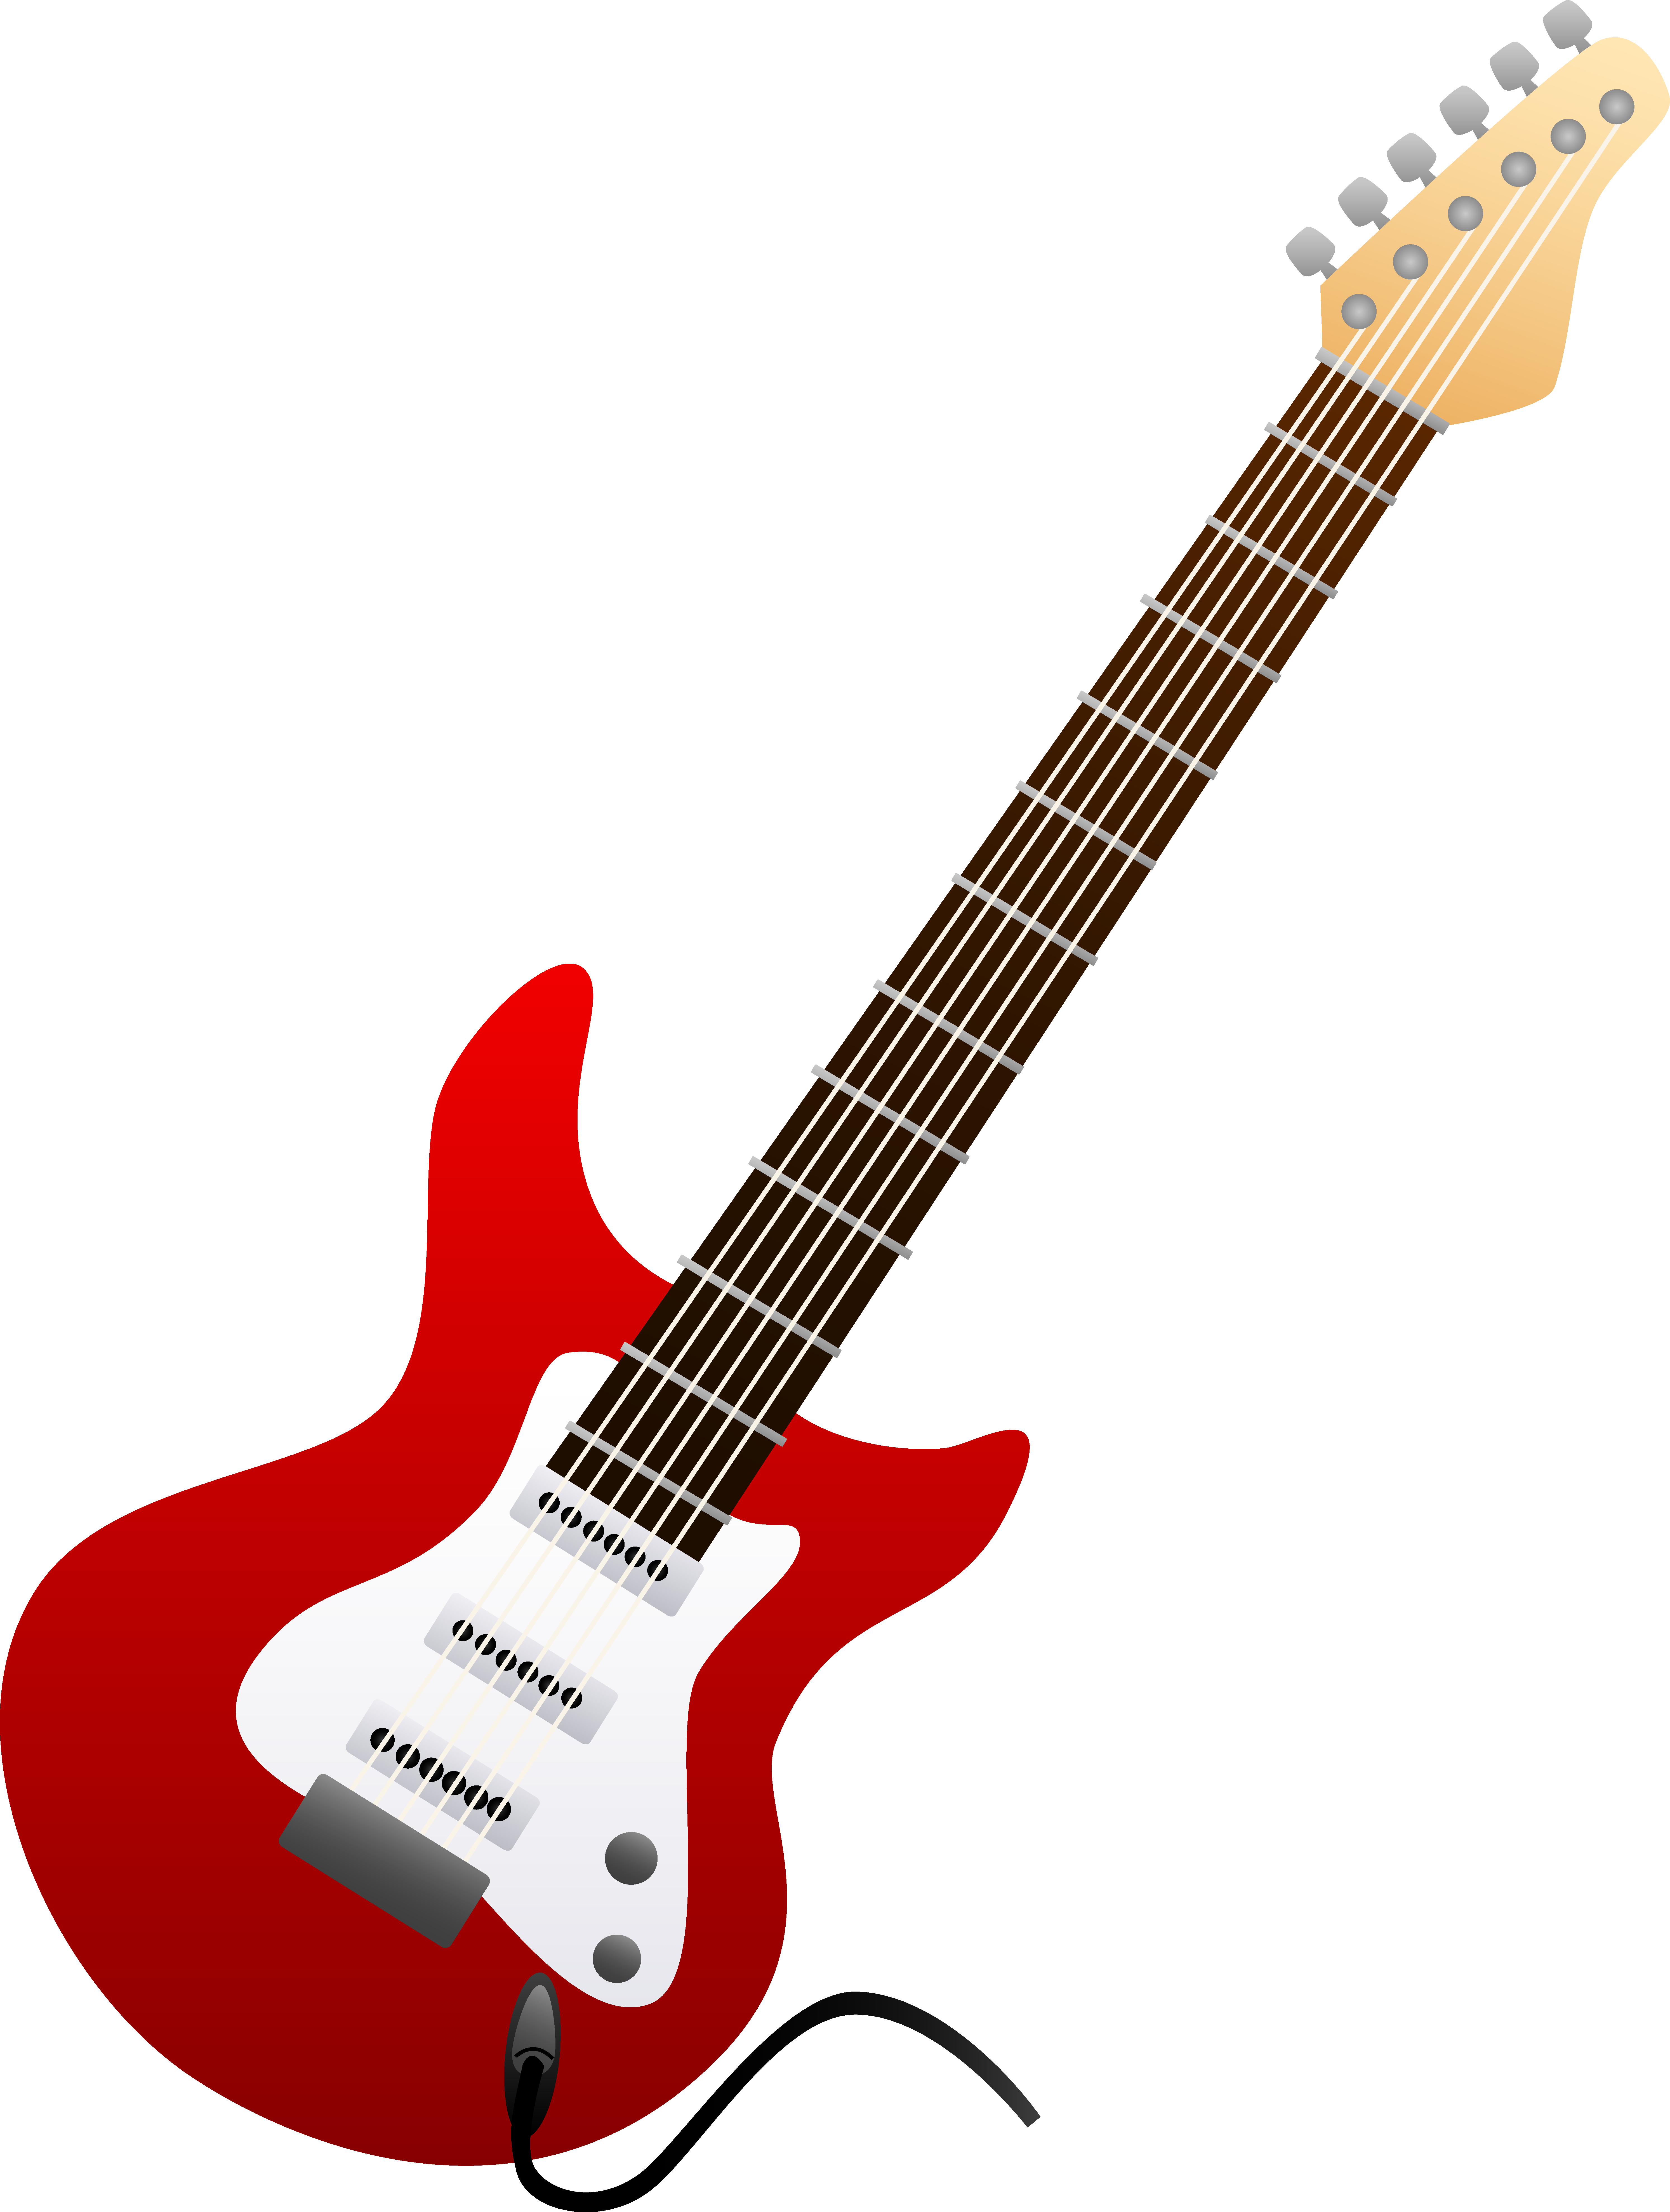 Rock Star Download On Png Image Clipart